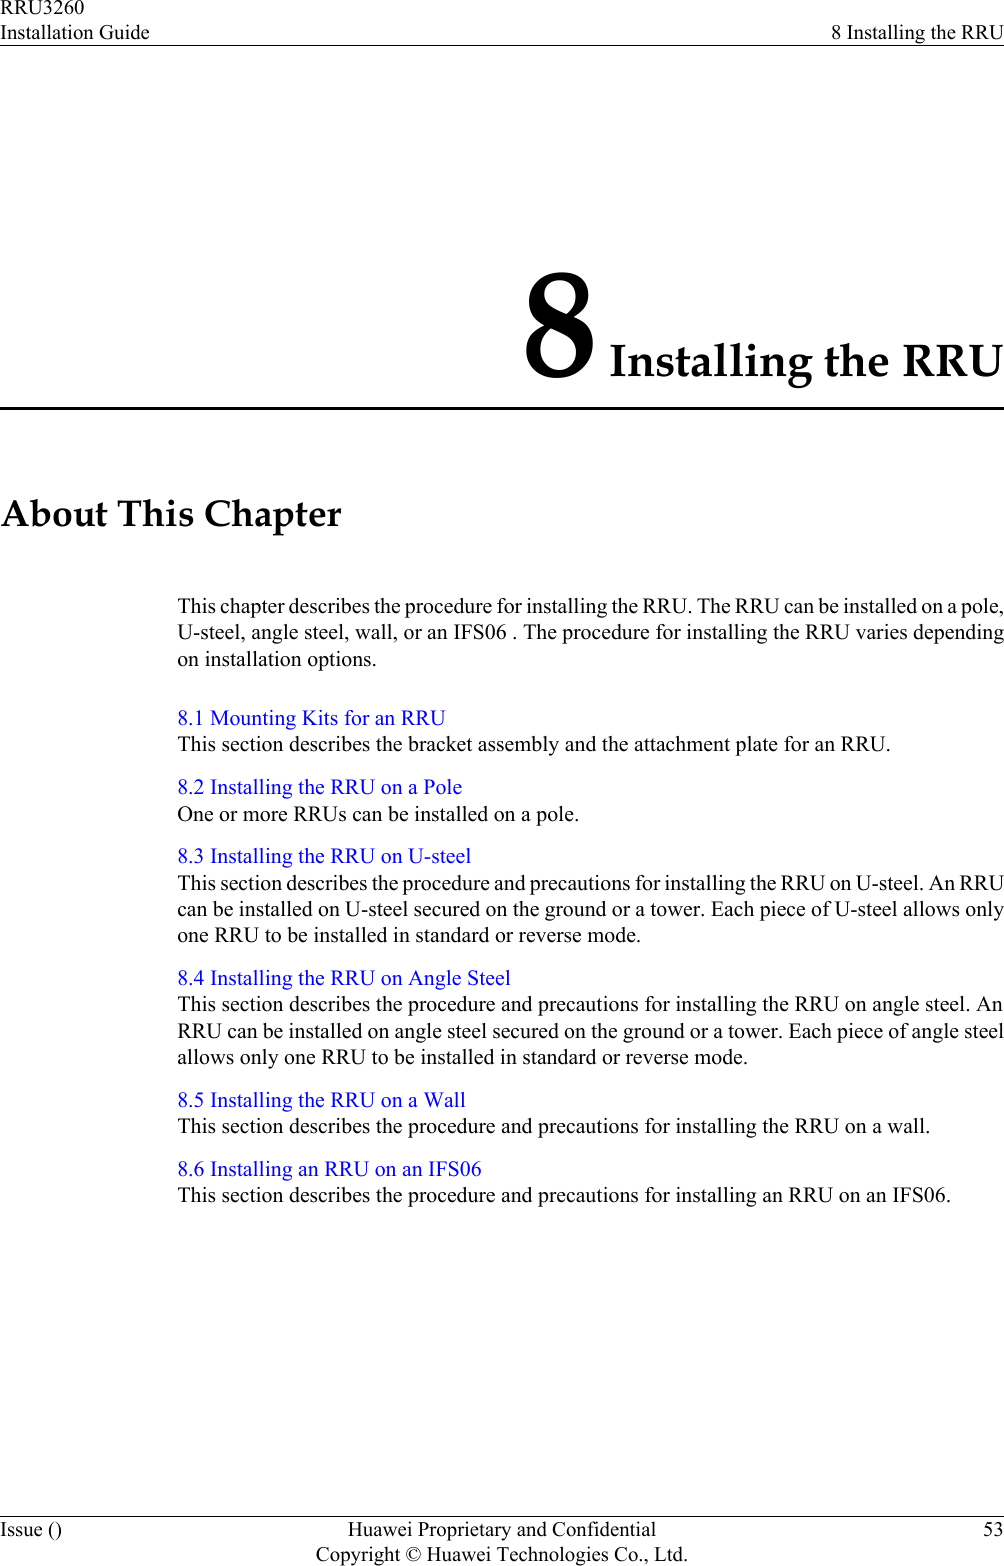 8 Installing the RRUAbout This ChapterThis chapter describes the procedure for installing the RRU. The RRU can be installed on a pole,U-steel, angle steel, wall, or an IFS06 . The procedure for installing the RRU varies dependingon installation options.8.1 Mounting Kits for an RRUThis section describes the bracket assembly and the attachment plate for an RRU.8.2 Installing the RRU on a PoleOne or more RRUs can be installed on a pole.8.3 Installing the RRU on U-steelThis section describes the procedure and precautions for installing the RRU on U-steel. An RRUcan be installed on U-steel secured on the ground or a tower. Each piece of U-steel allows onlyone RRU to be installed in standard or reverse mode.8.4 Installing the RRU on Angle SteelThis section describes the procedure and precautions for installing the RRU on angle steel. AnRRU can be installed on angle steel secured on the ground or a tower. Each piece of angle steelallows only one RRU to be installed in standard or reverse mode.8.5 Installing the RRU on a WallThis section describes the procedure and precautions for installing the RRU on a wall.8.6 Installing an RRU on an IFS06This section describes the procedure and precautions for installing an RRU on an IFS06.RRU3260Installation Guide 8 Installing the RRUIssue () Huawei Proprietary and ConfidentialCopyright © Huawei Technologies Co., Ltd.53